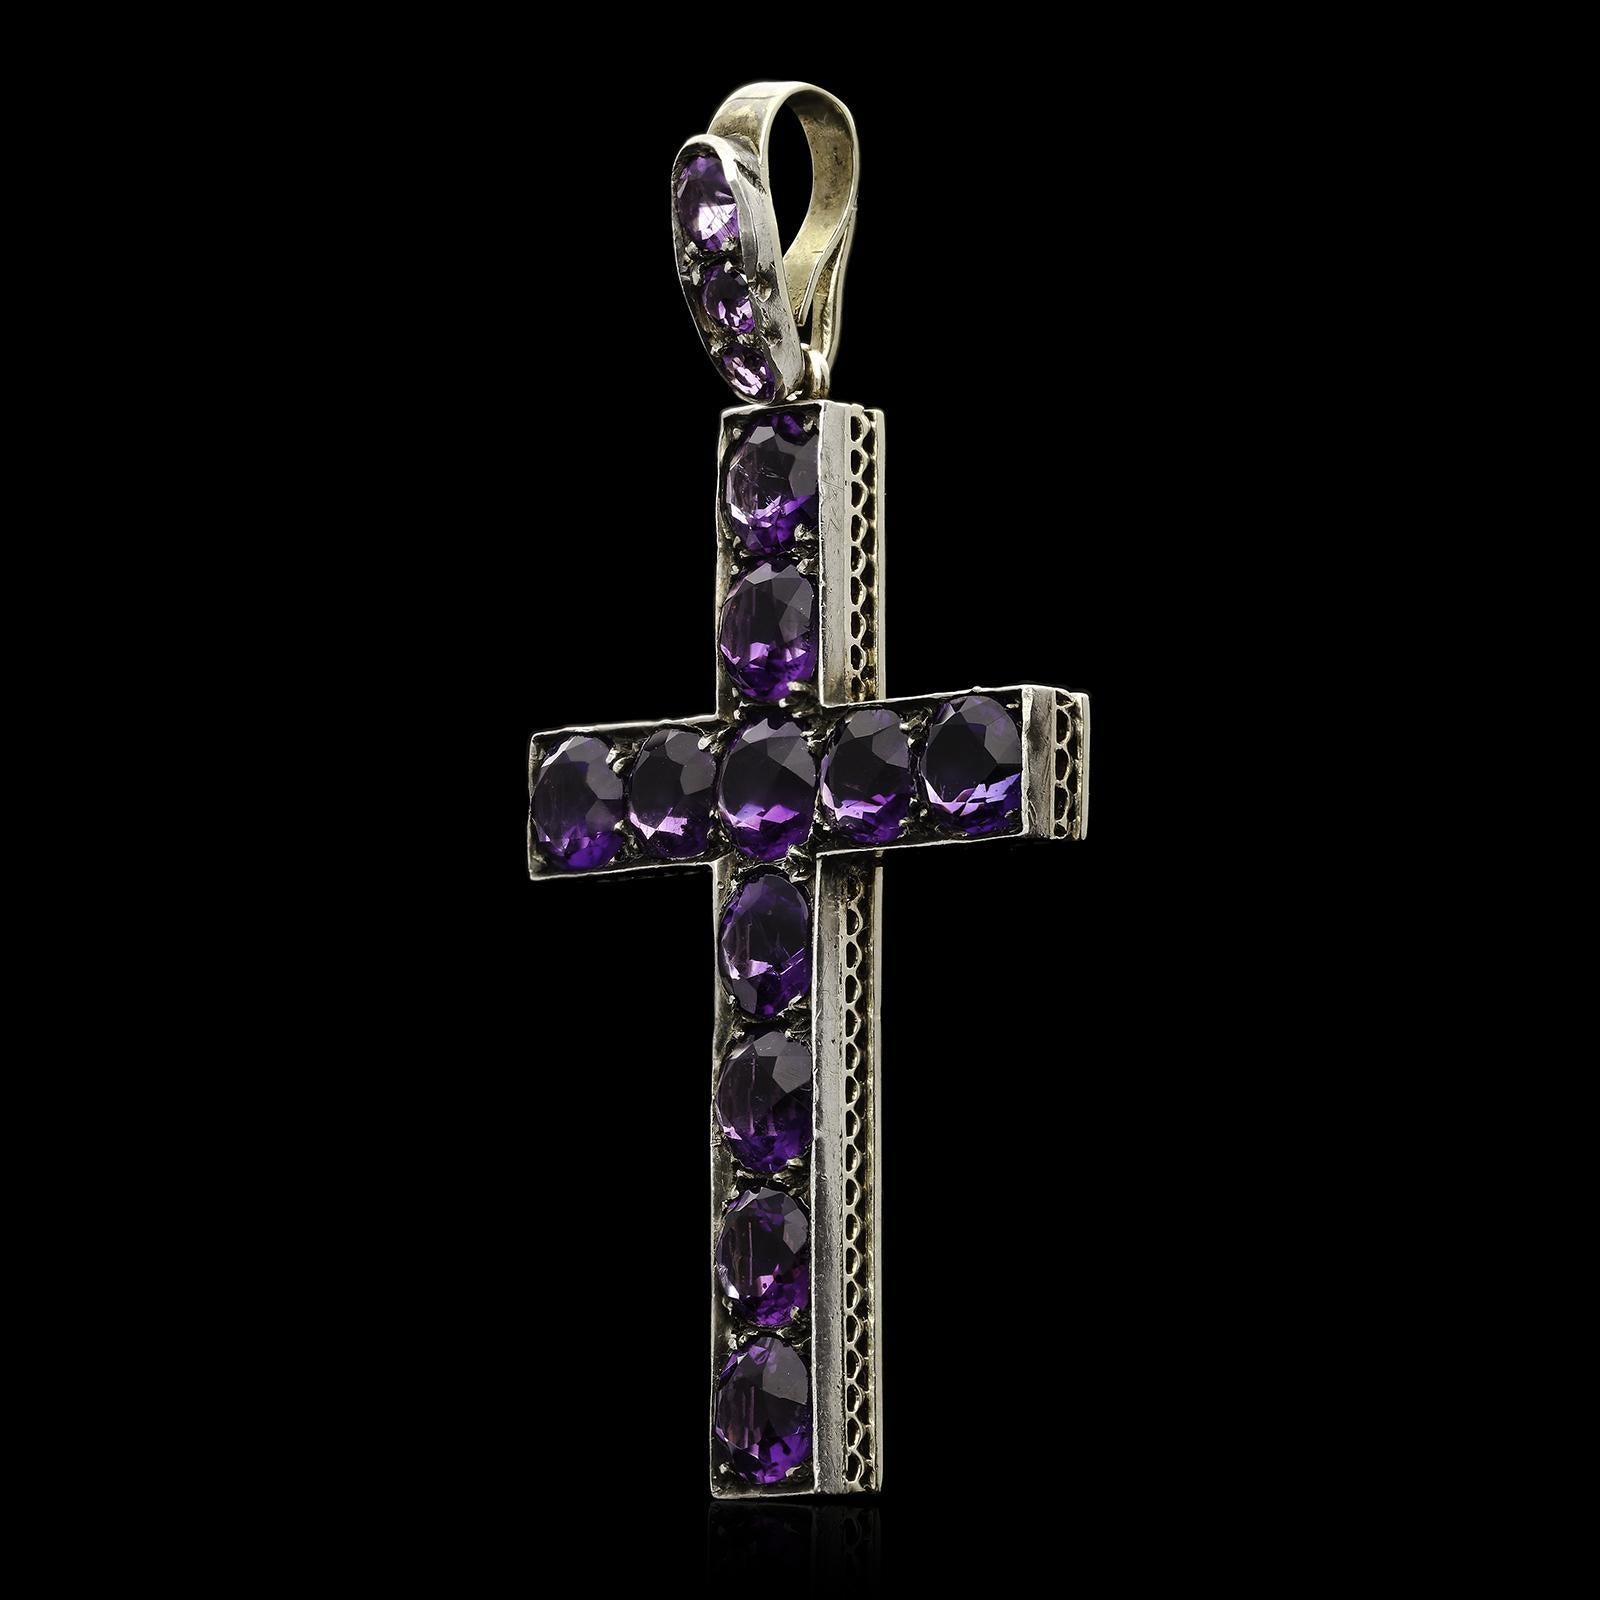 A beautiful Victorian Latin style cross pendant c.1860s set with eleven finely matched round faceted amethysts of deep richly hued purple colour all set in silver backed with yellow gold which has been finely pierced to create a delicate scalloped